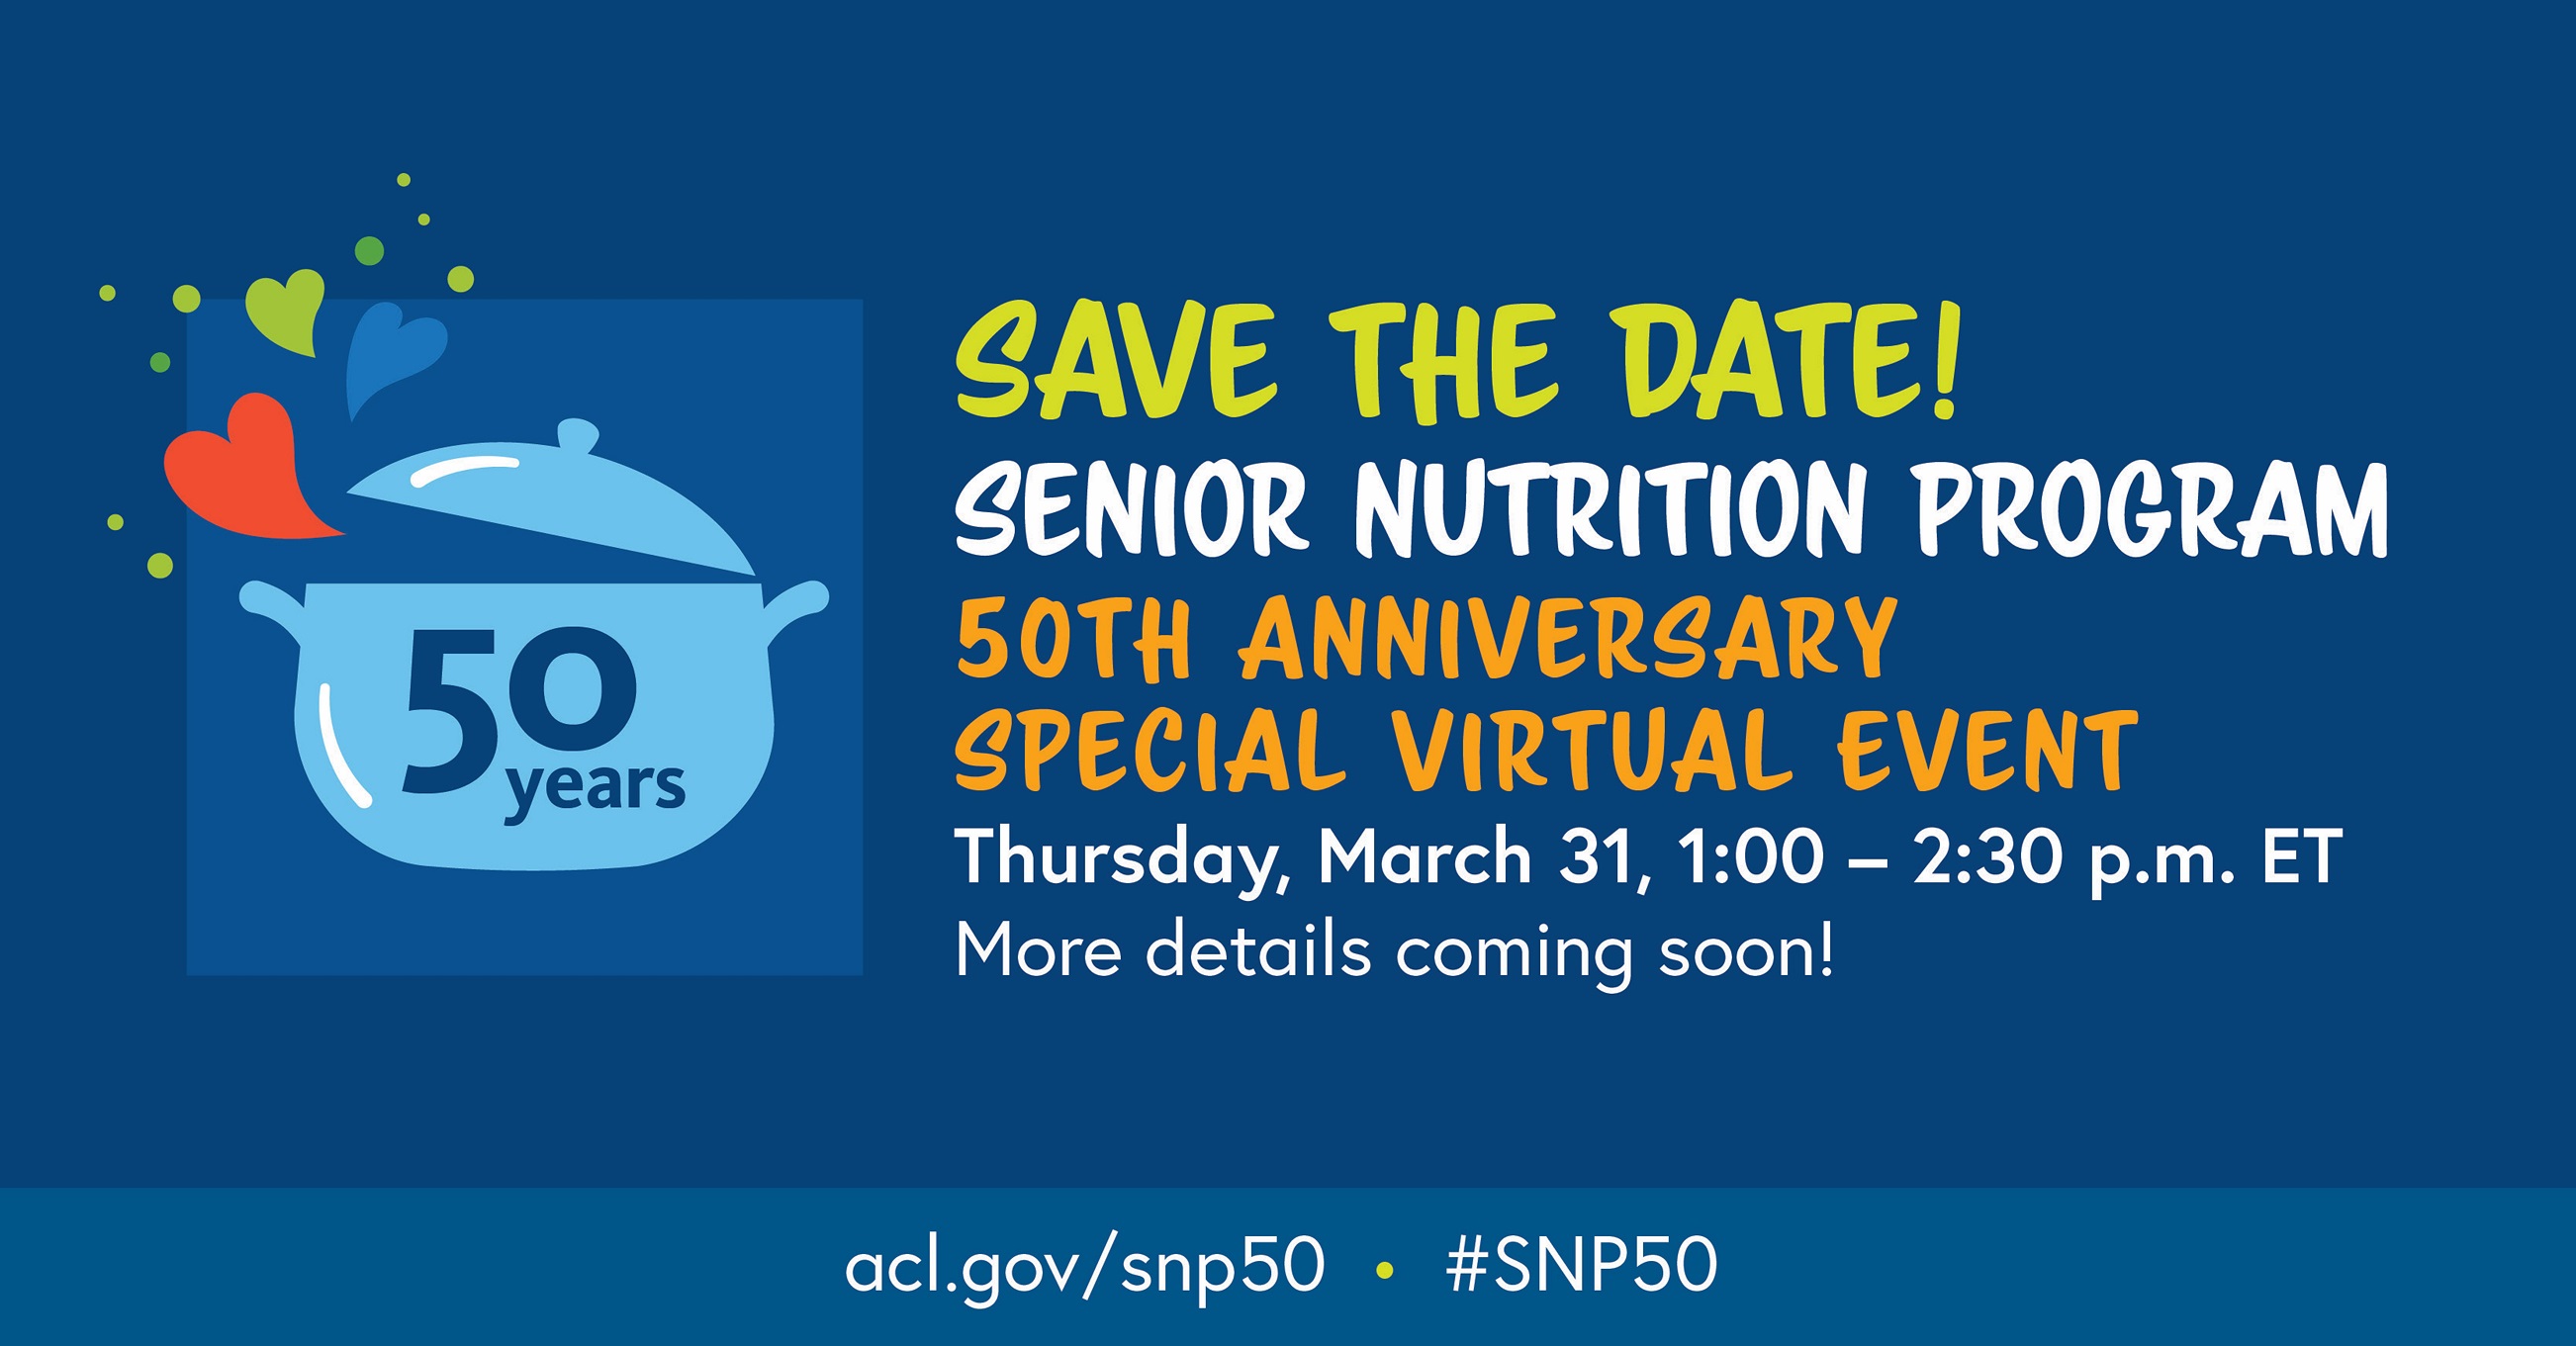 Save the Date: Senior Nutrition Program 50th Anniversary Special Virtual Event. March 31, 2022, 1-2:30 PM ET